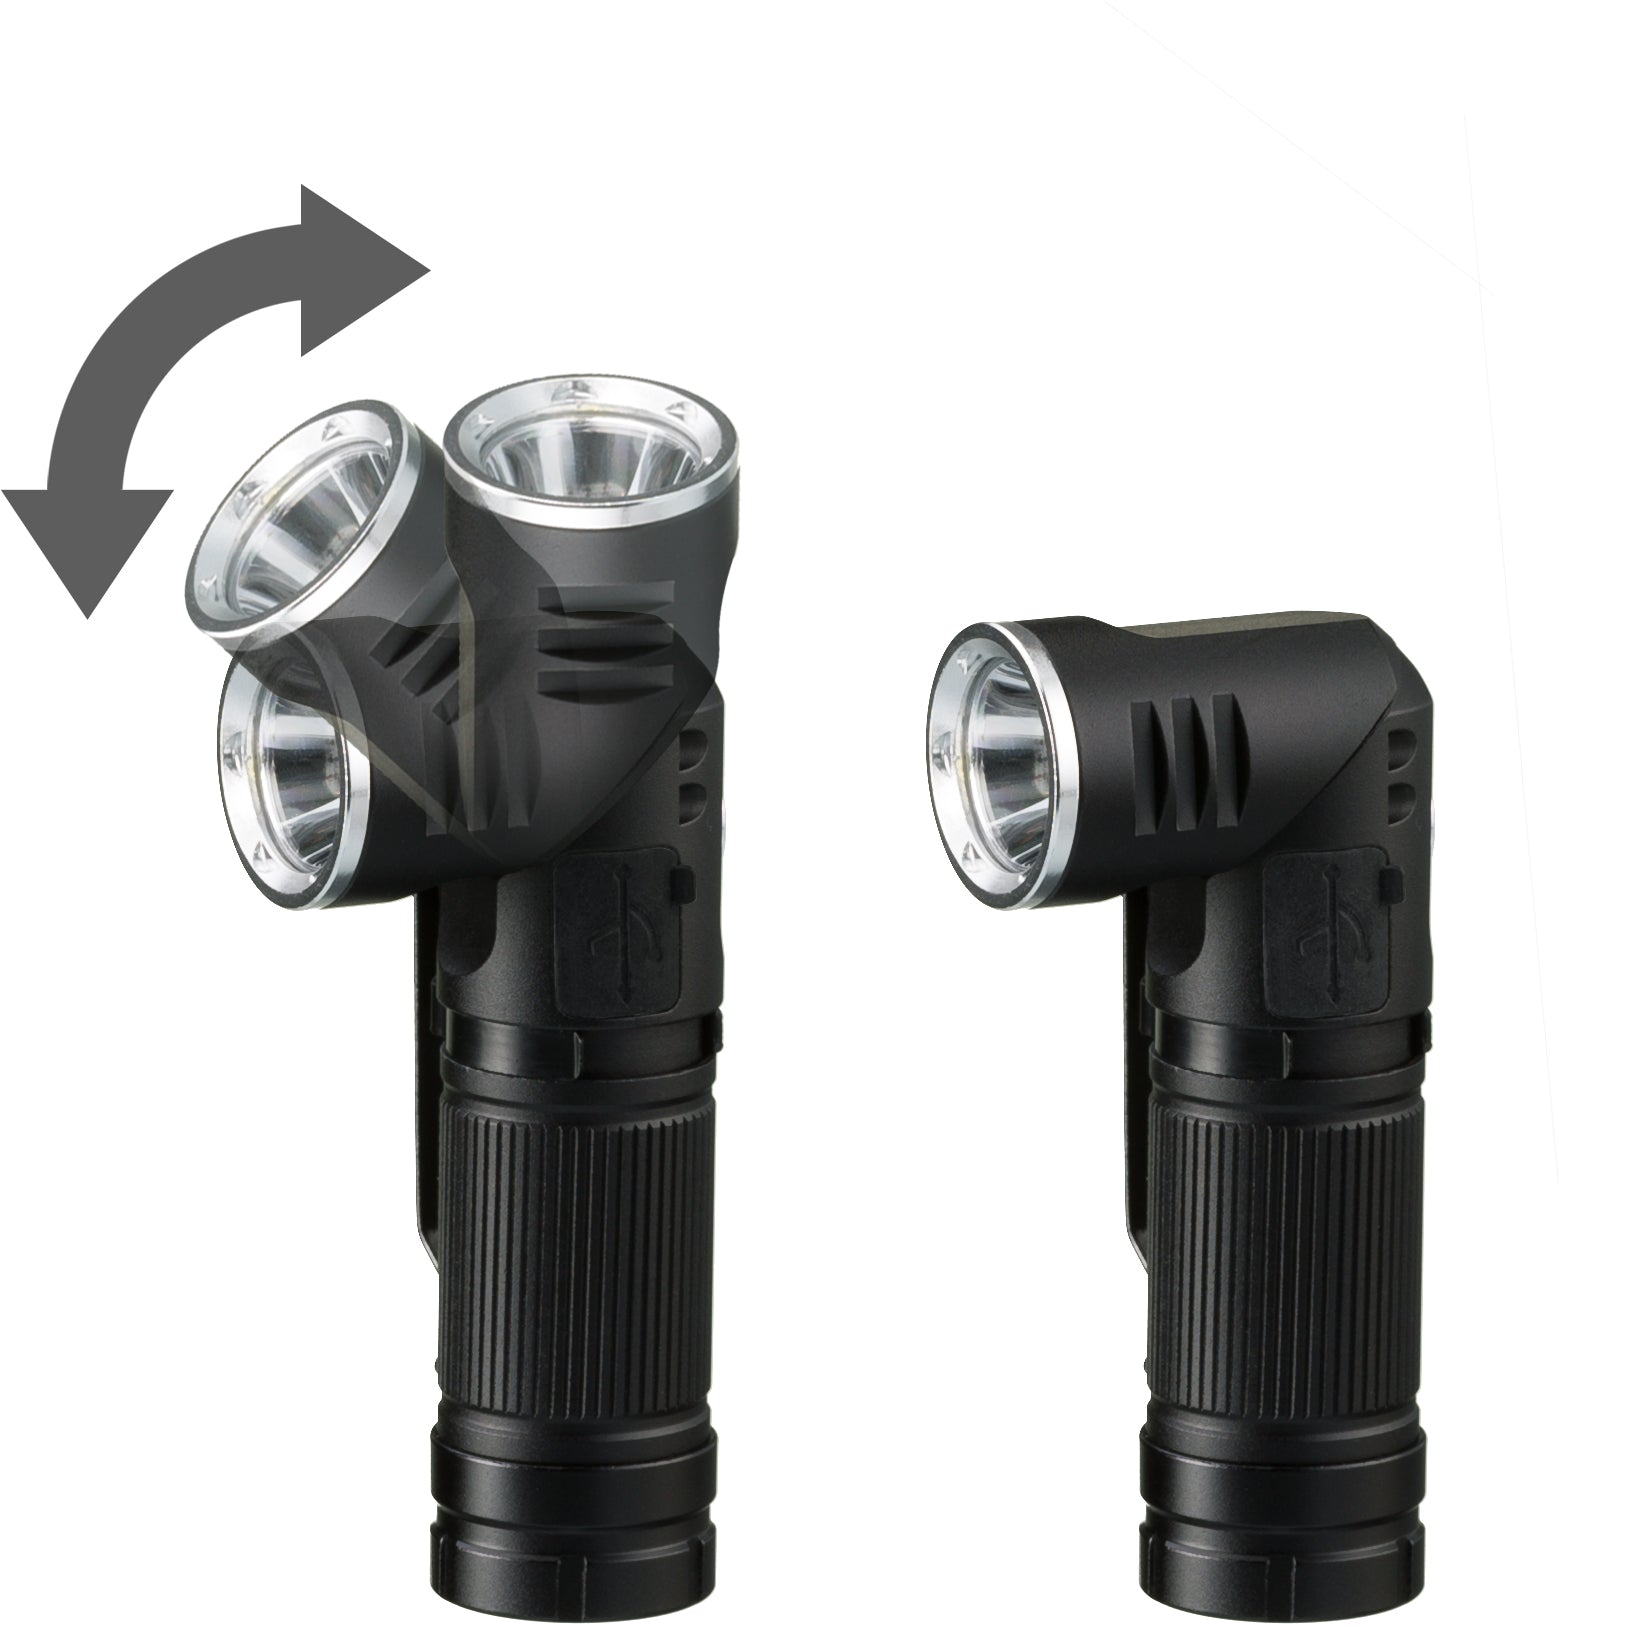 Bresser: 2in1 led 450 LM National Geographic flashlight